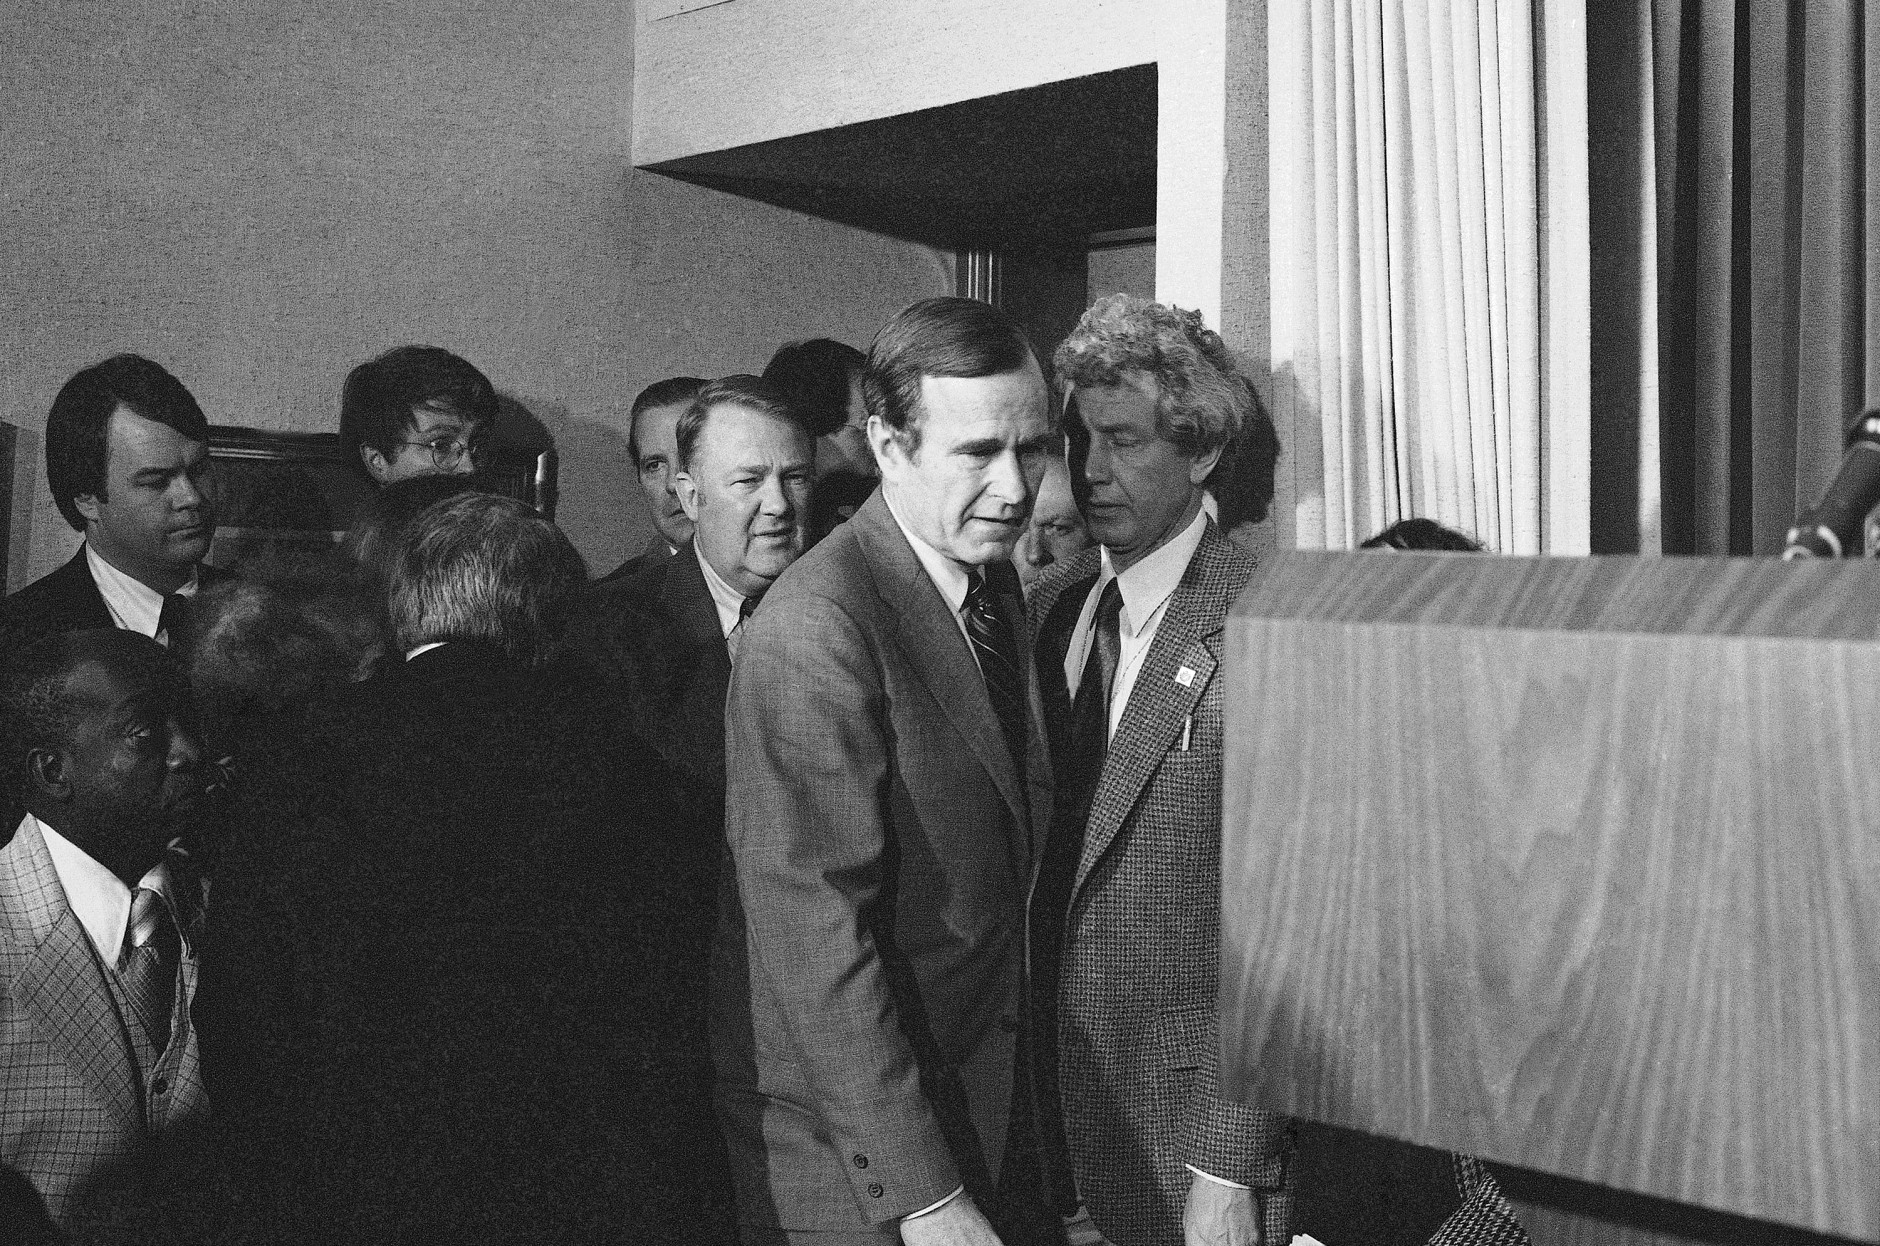 Vice President George Bush, followed by White House Chief of Staff Edwin Meese III, arrives for an appearance before reporters at the White House in Washington, March 30, 1981. The vice president interrupted a trip to Texas after the shooting of President Ronald Reagan. (AP Photo)